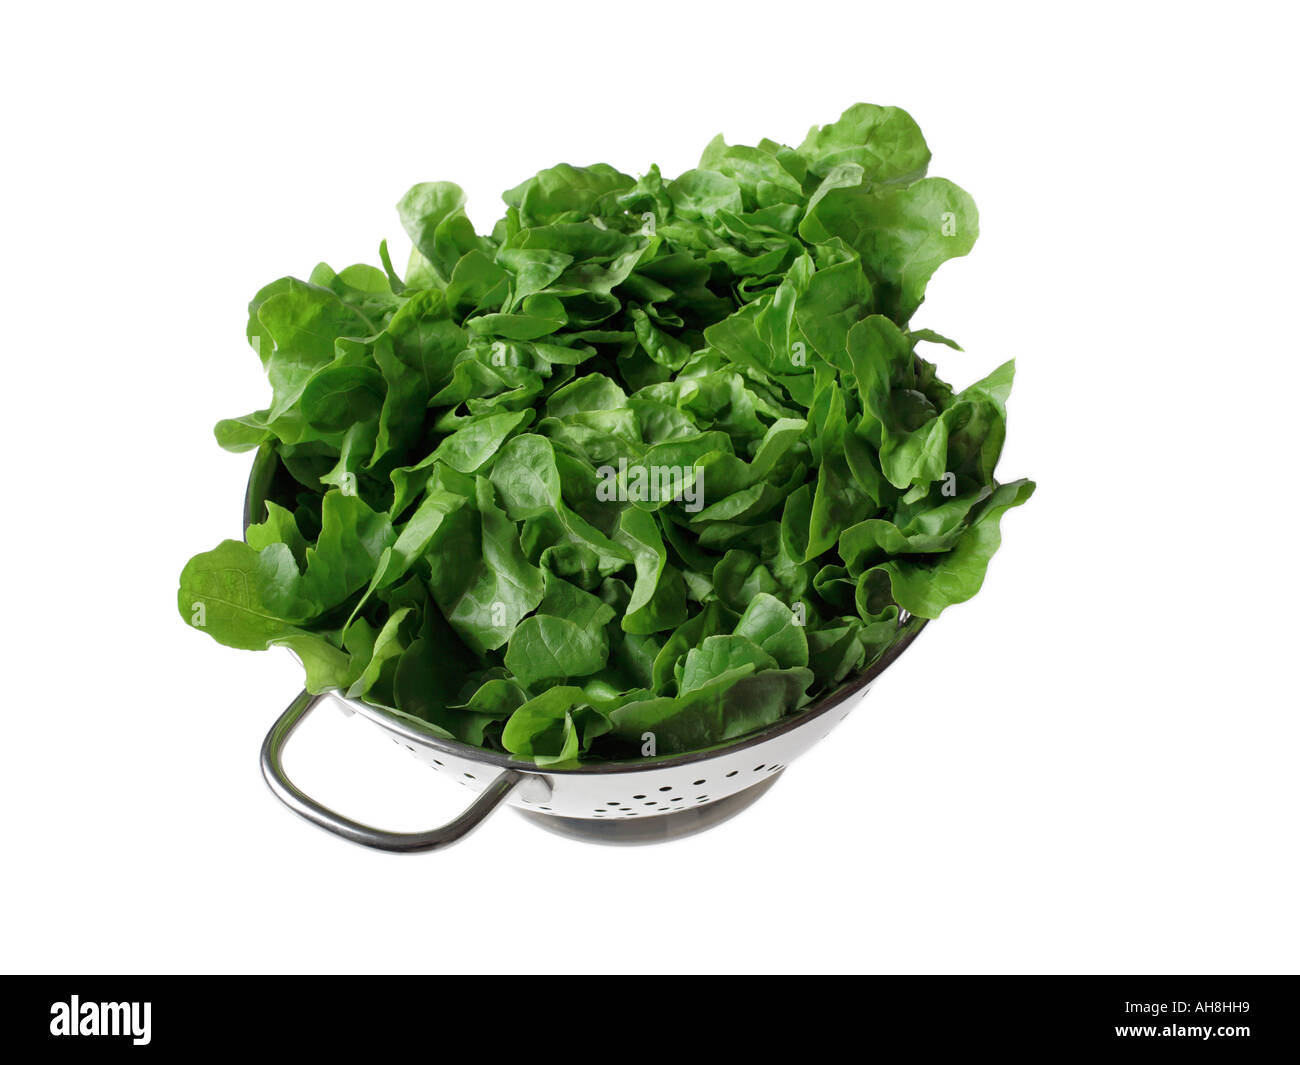 Curled lettuce in silver colander on white background Stock Photo